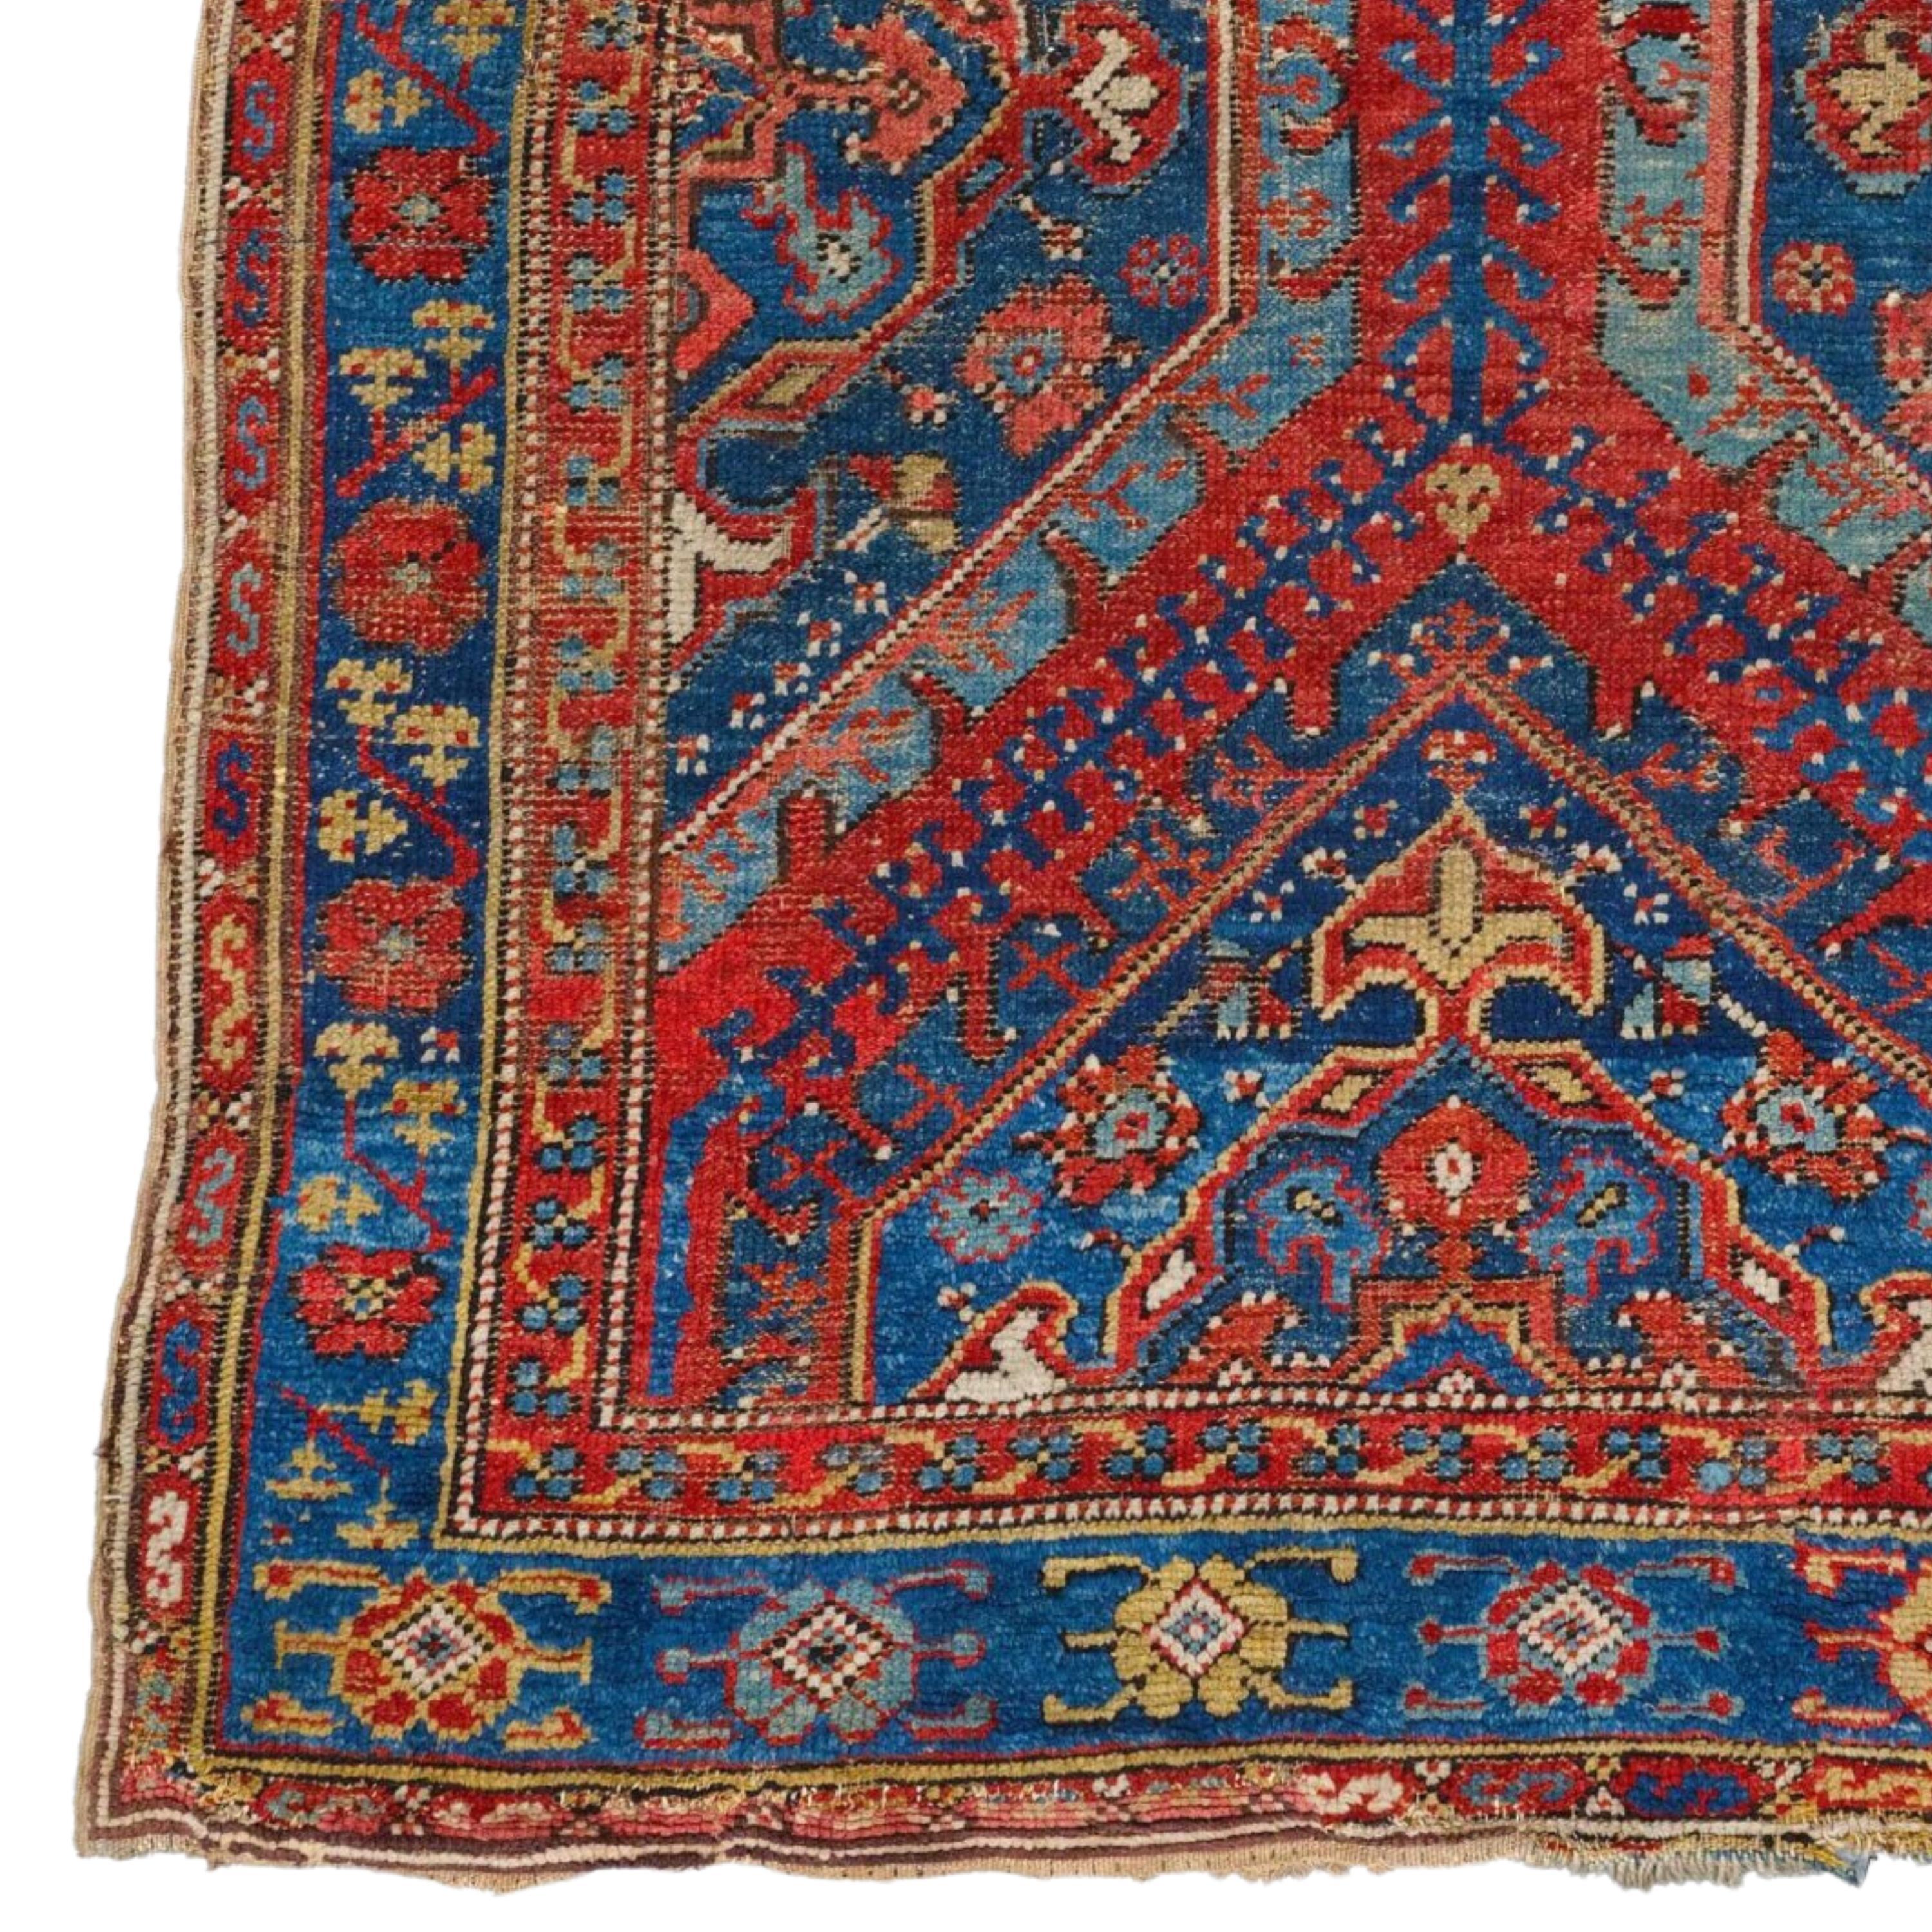 Early 18th Century Anatolian Ushak Rug Size 142 x 220 cm (4,65 x 7,21 ft)

By the 16th century the principal manufacture of large commercial carpets in Ottoman Turkey had been established at Uşak, which produced rugs for palace and mosque use and